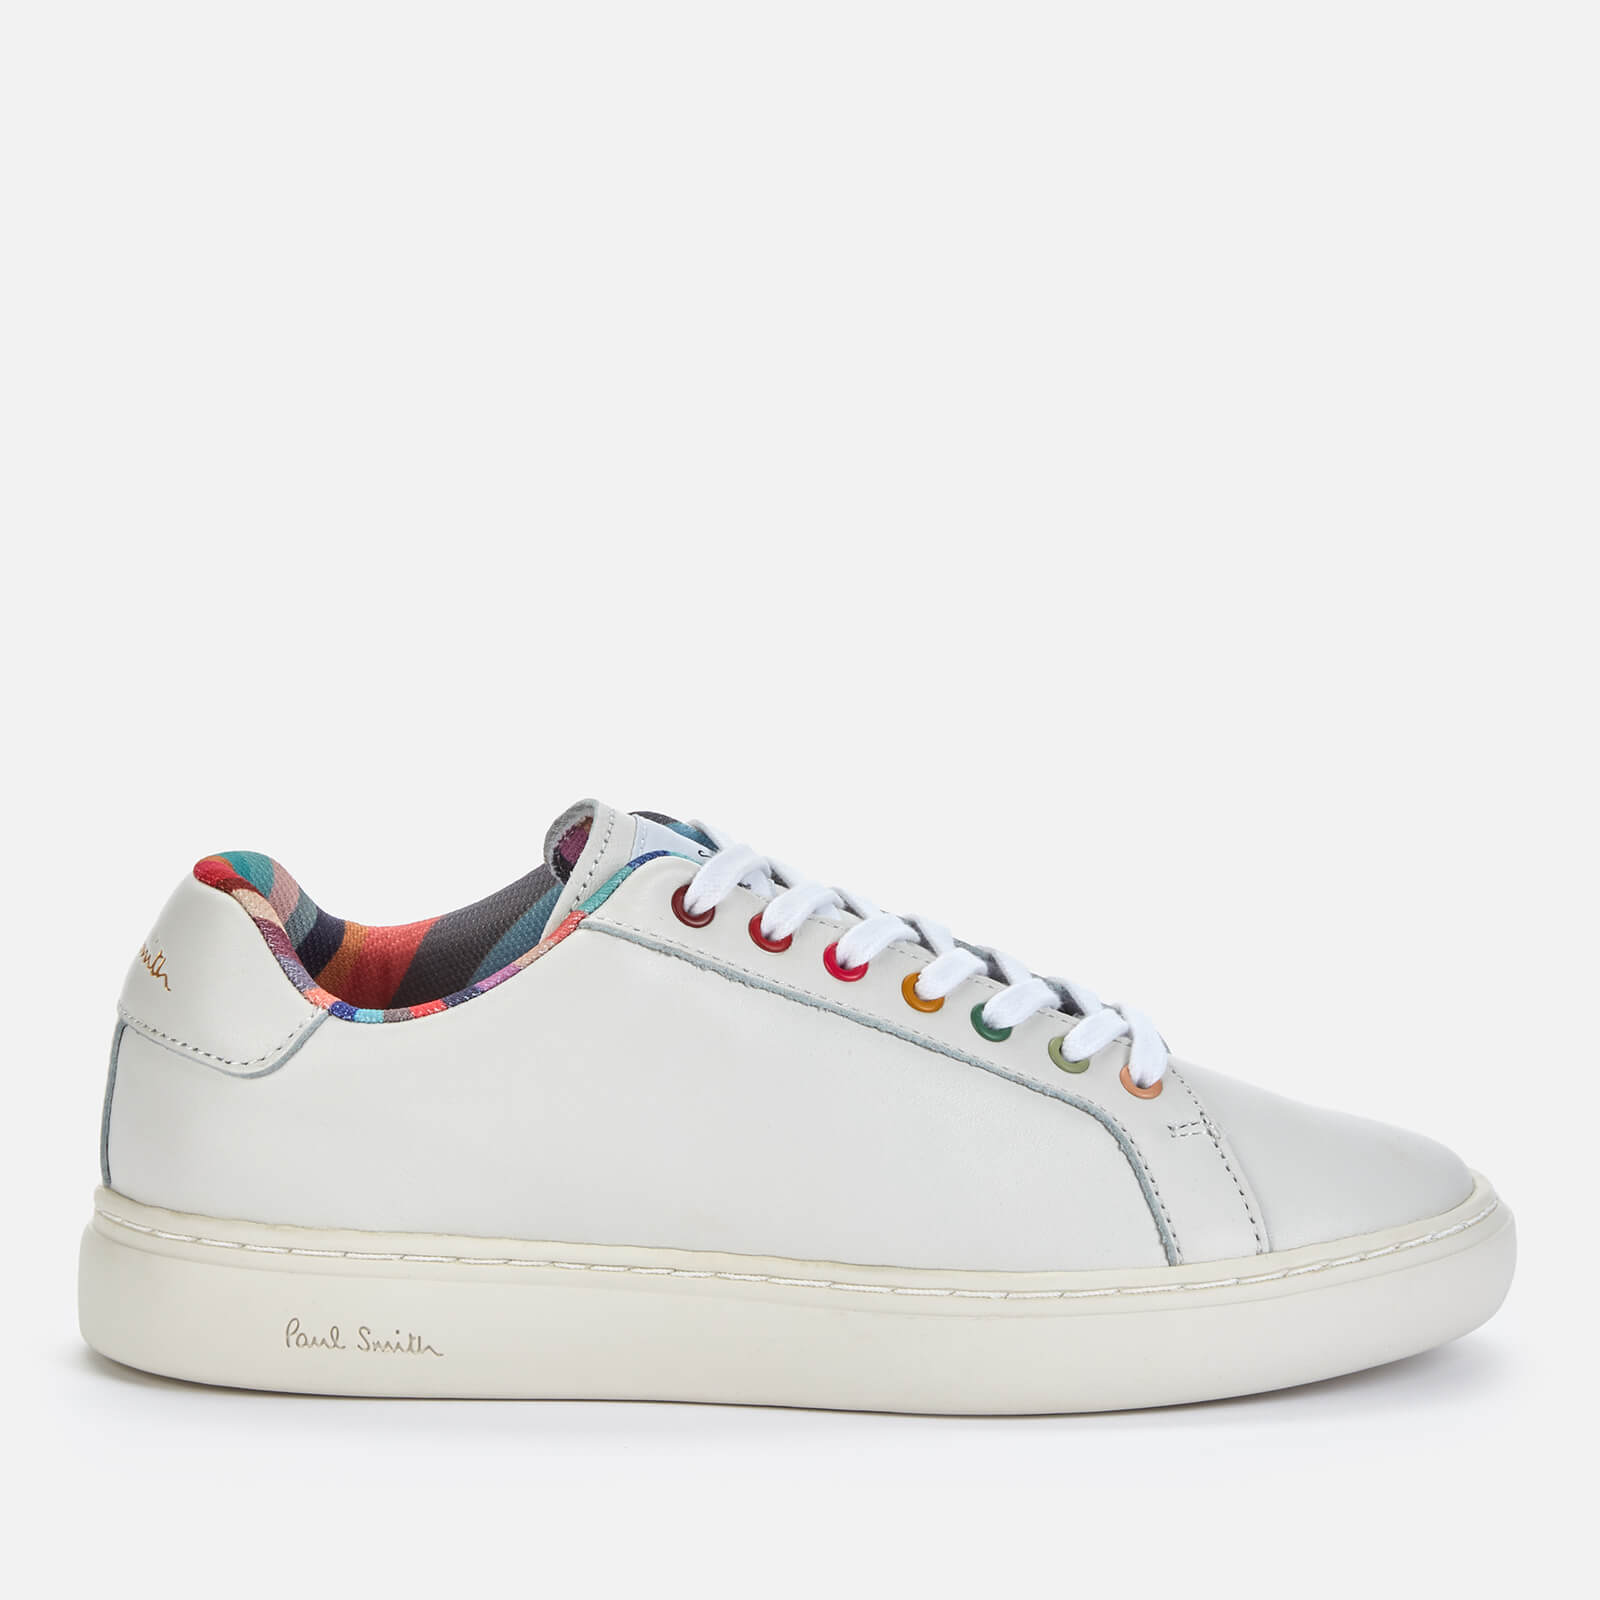 Paul Smith Women's Lapin Leather Low Top Trainers - White - UK 4